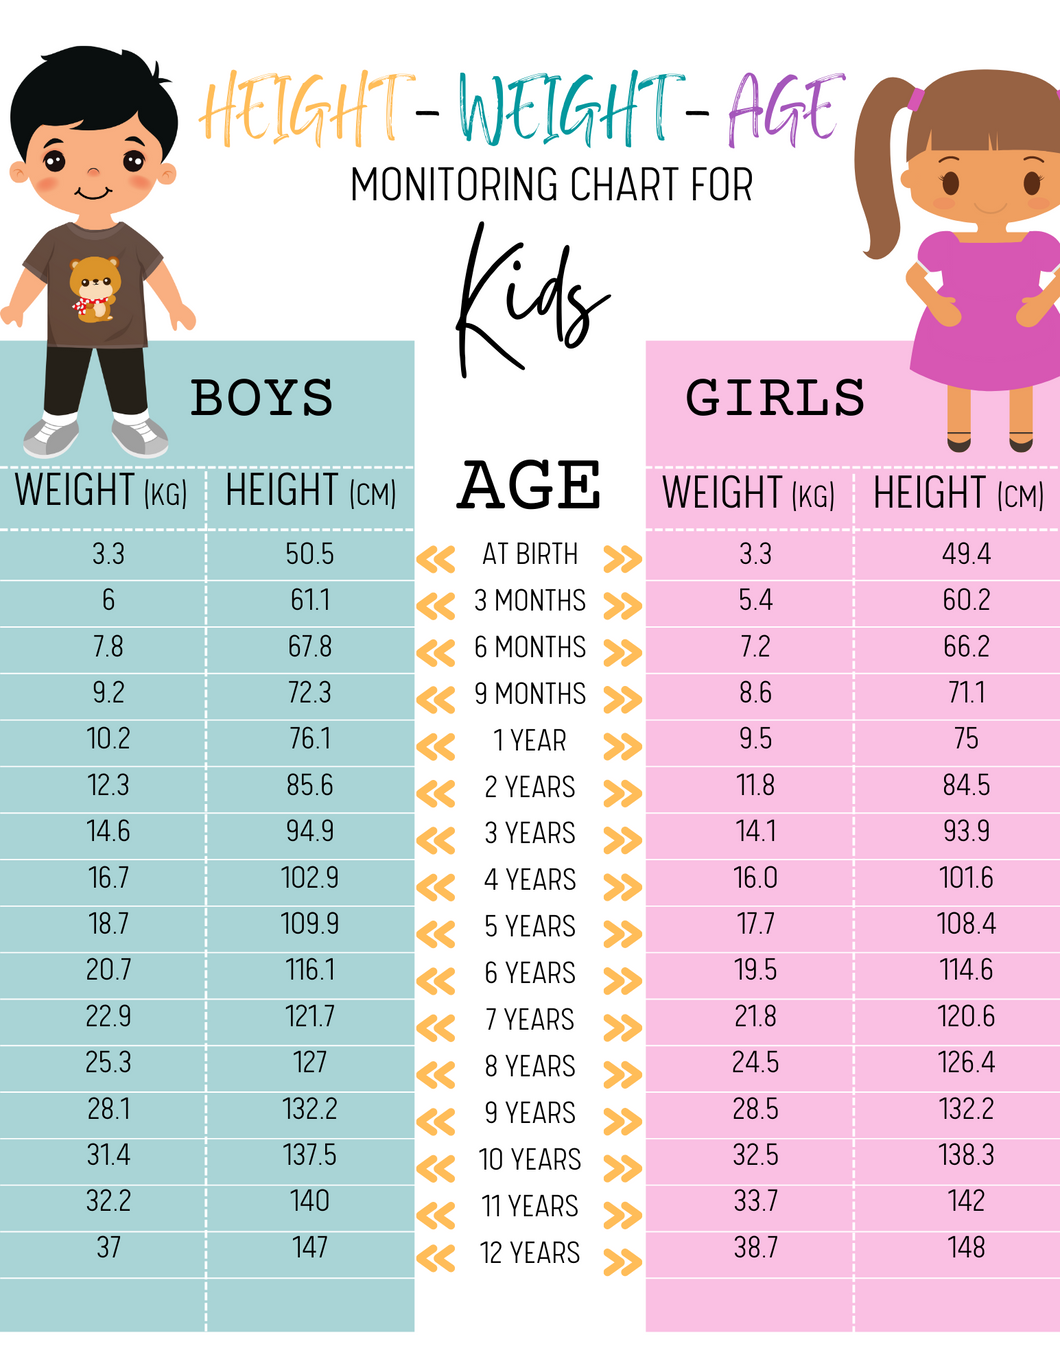 Height/Weight/Age Monitoring Chart